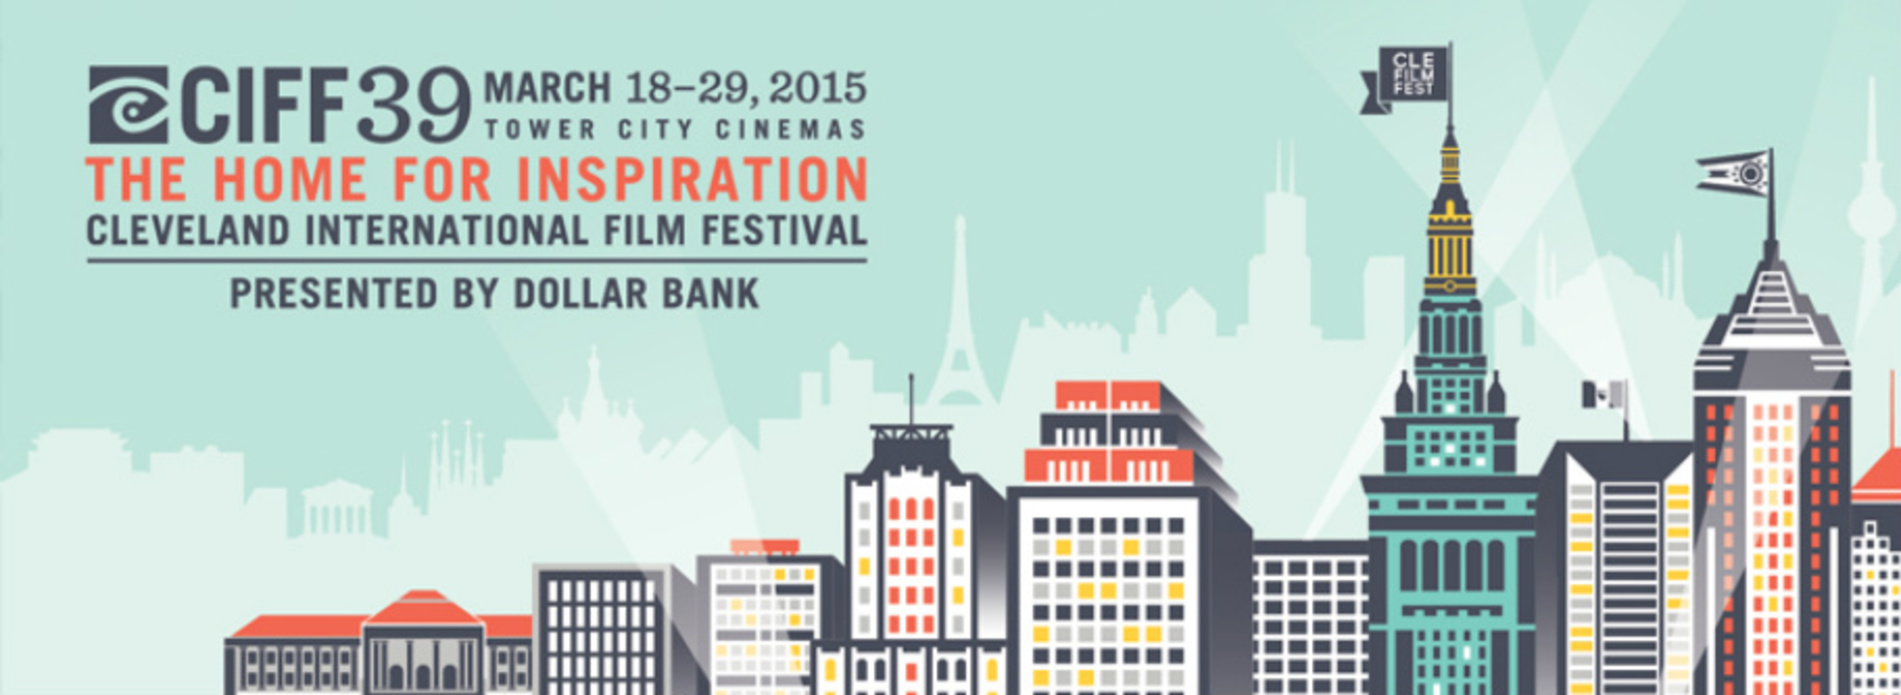 The 2015 FilmForums Series in partnership with the Cleveland International Film Festival, Part 2